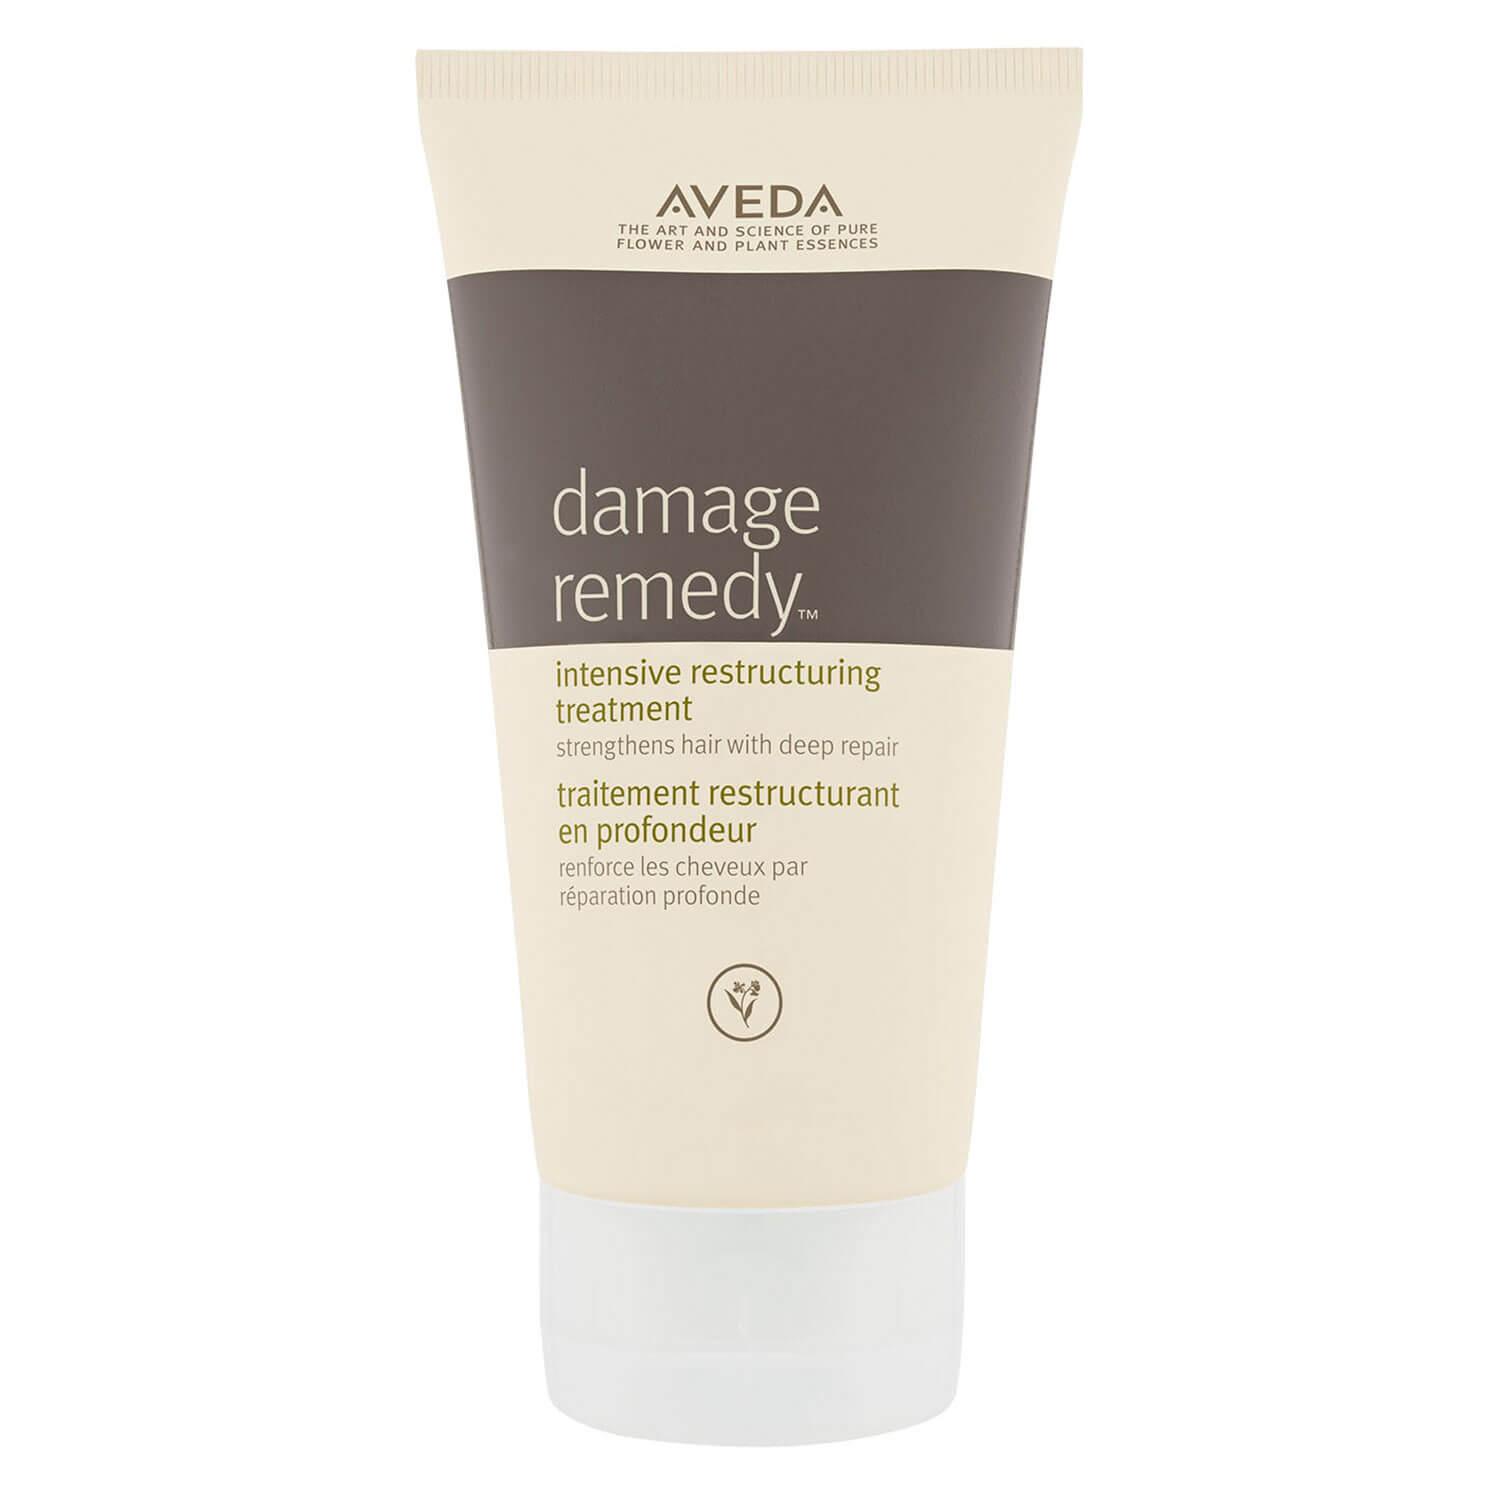 damage remedy - intensive restructuring treatment